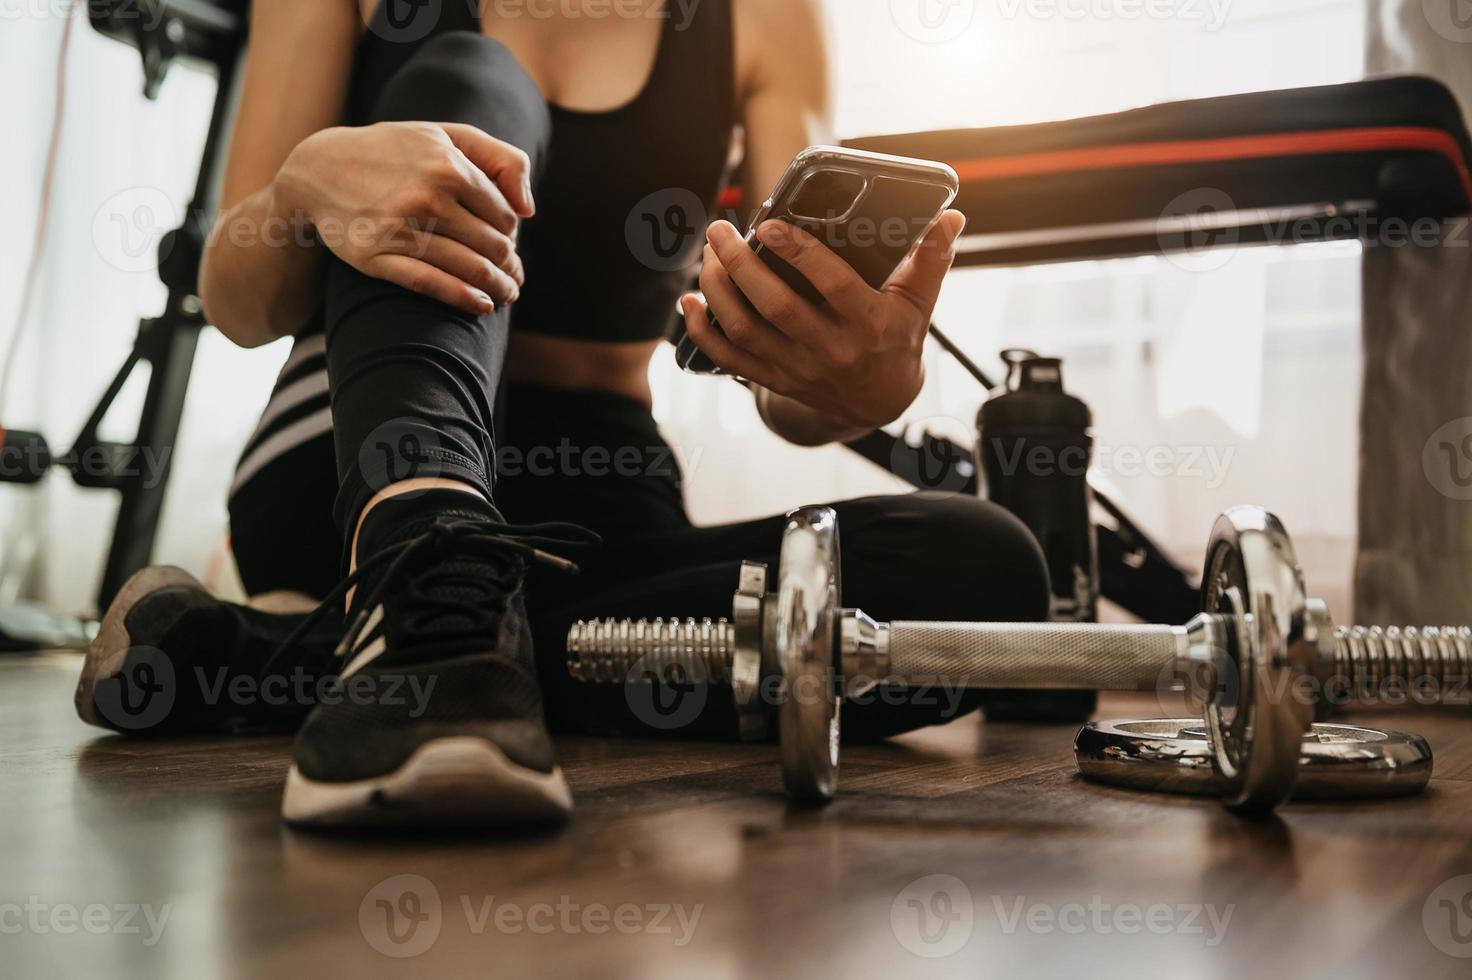 lose up of woman using smart phone while workout in fitness gym. Sport and Technology concept. Lifestyles and Healthcare theme. photo